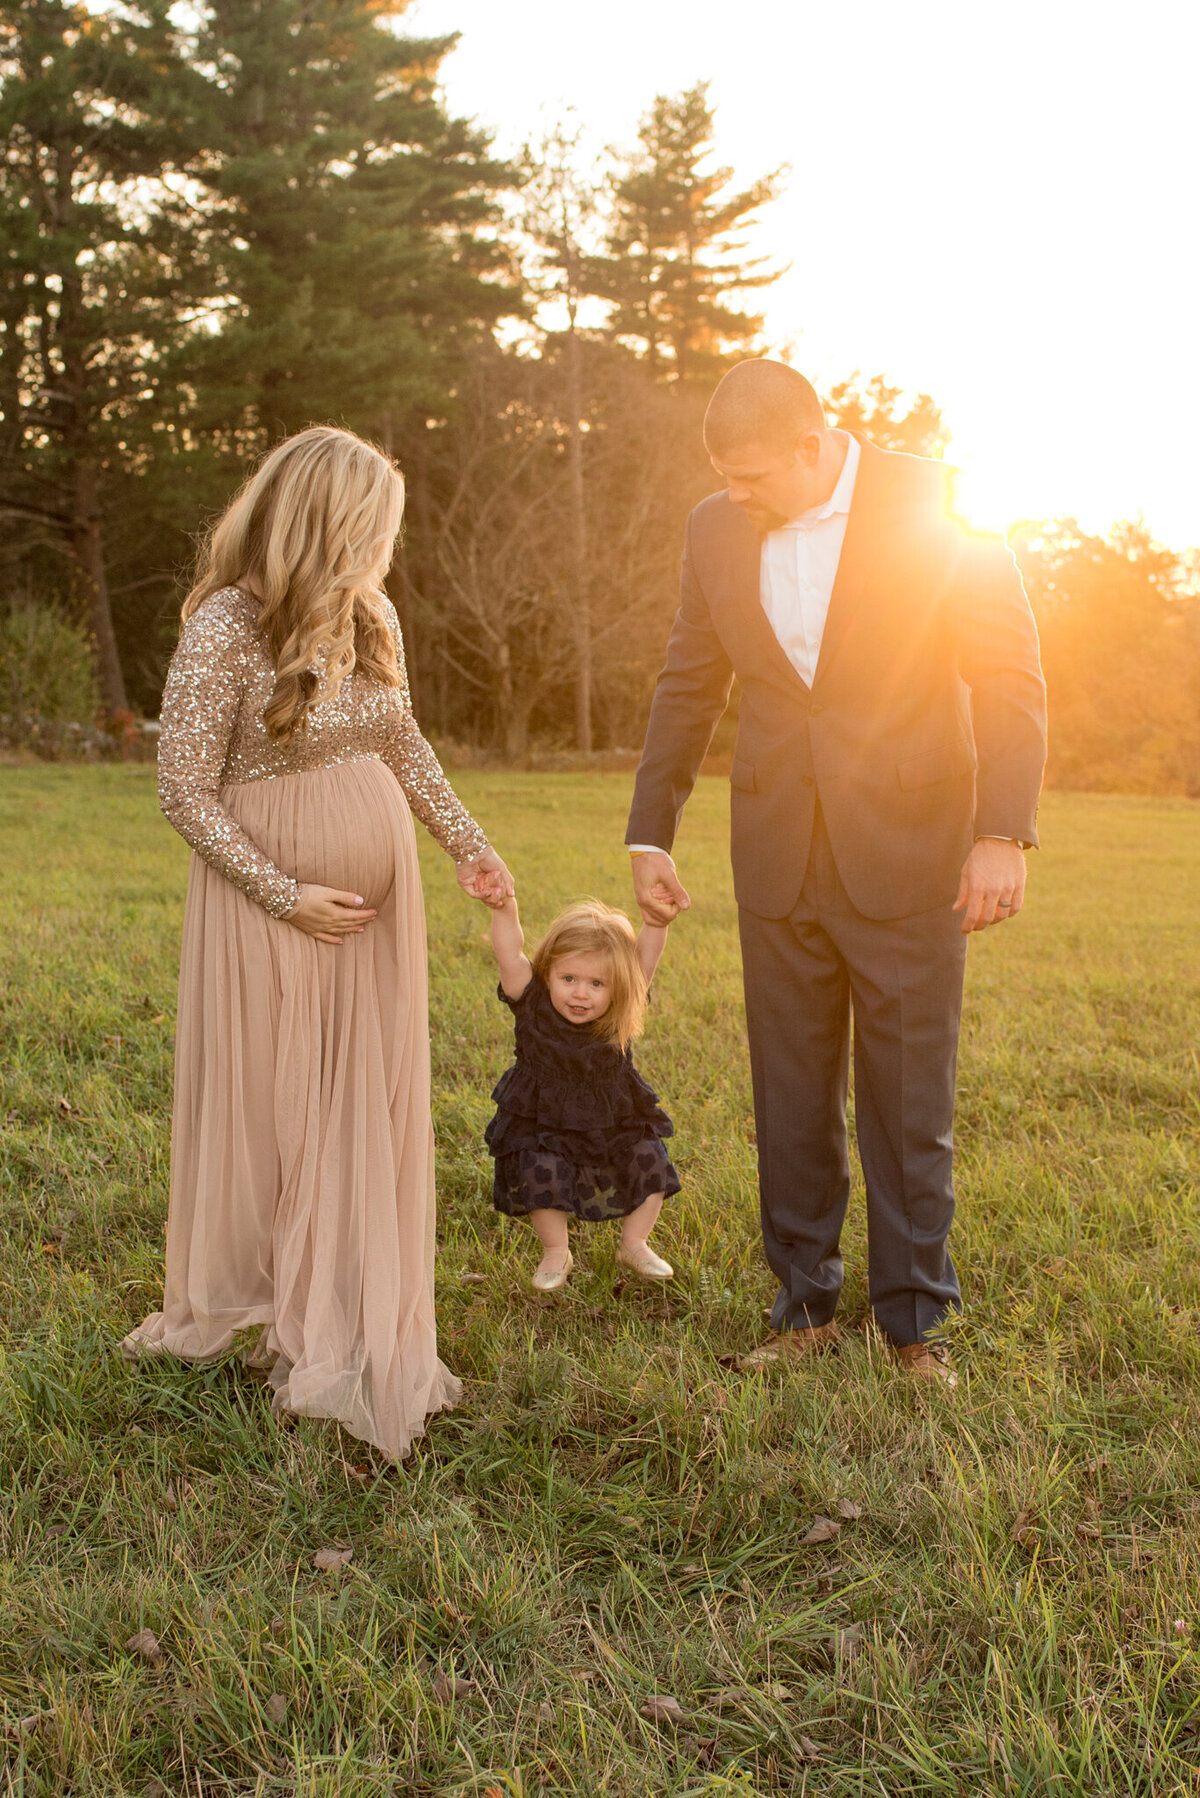 A family of three with a pregnant mom, swinging their daughter in a field at sunset